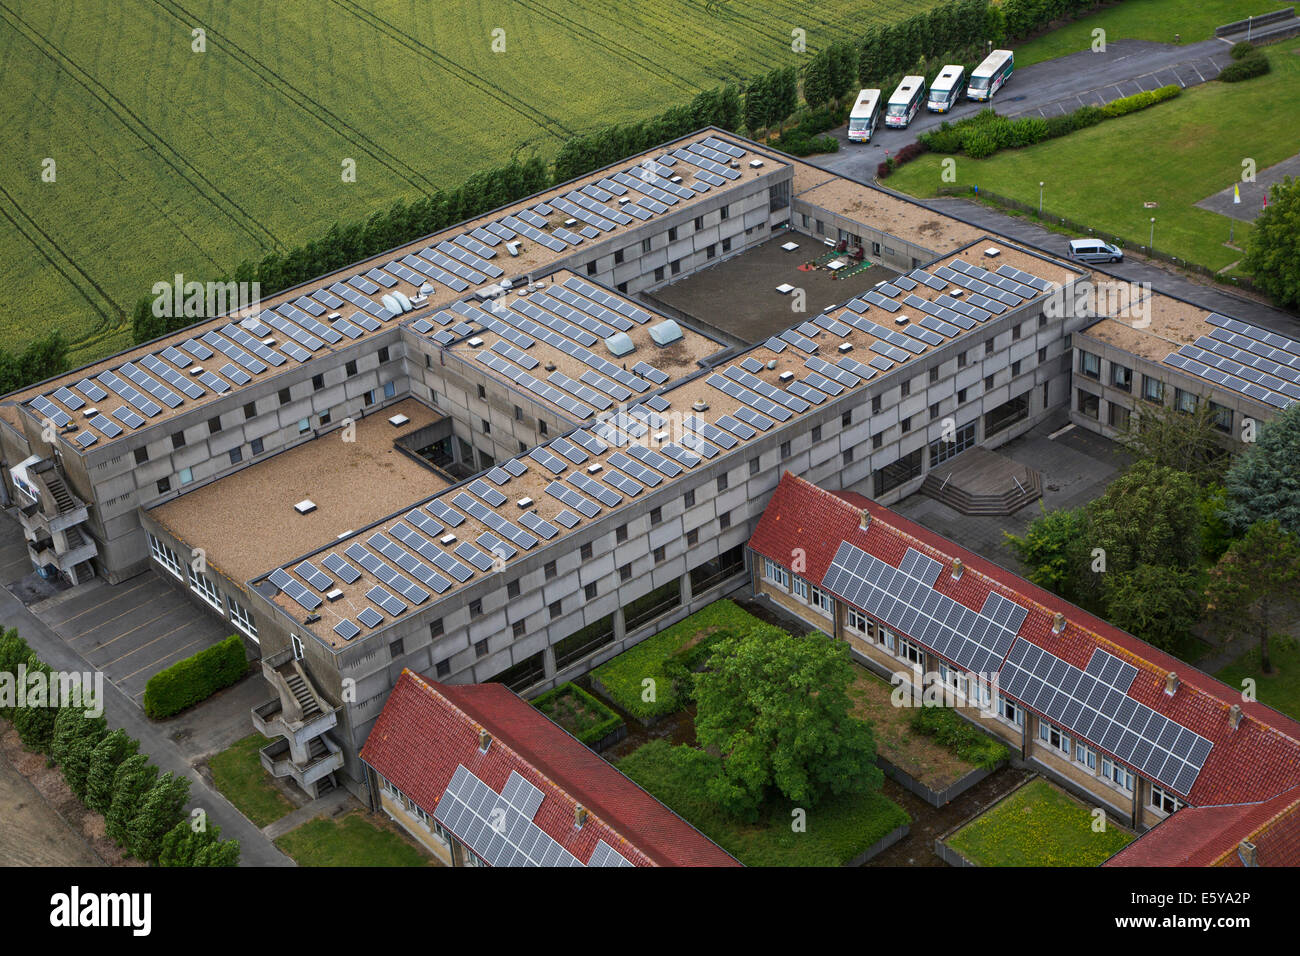 Photovoltaic solar panels on roof providing electricity by sun energy to office buildings Stock Photo